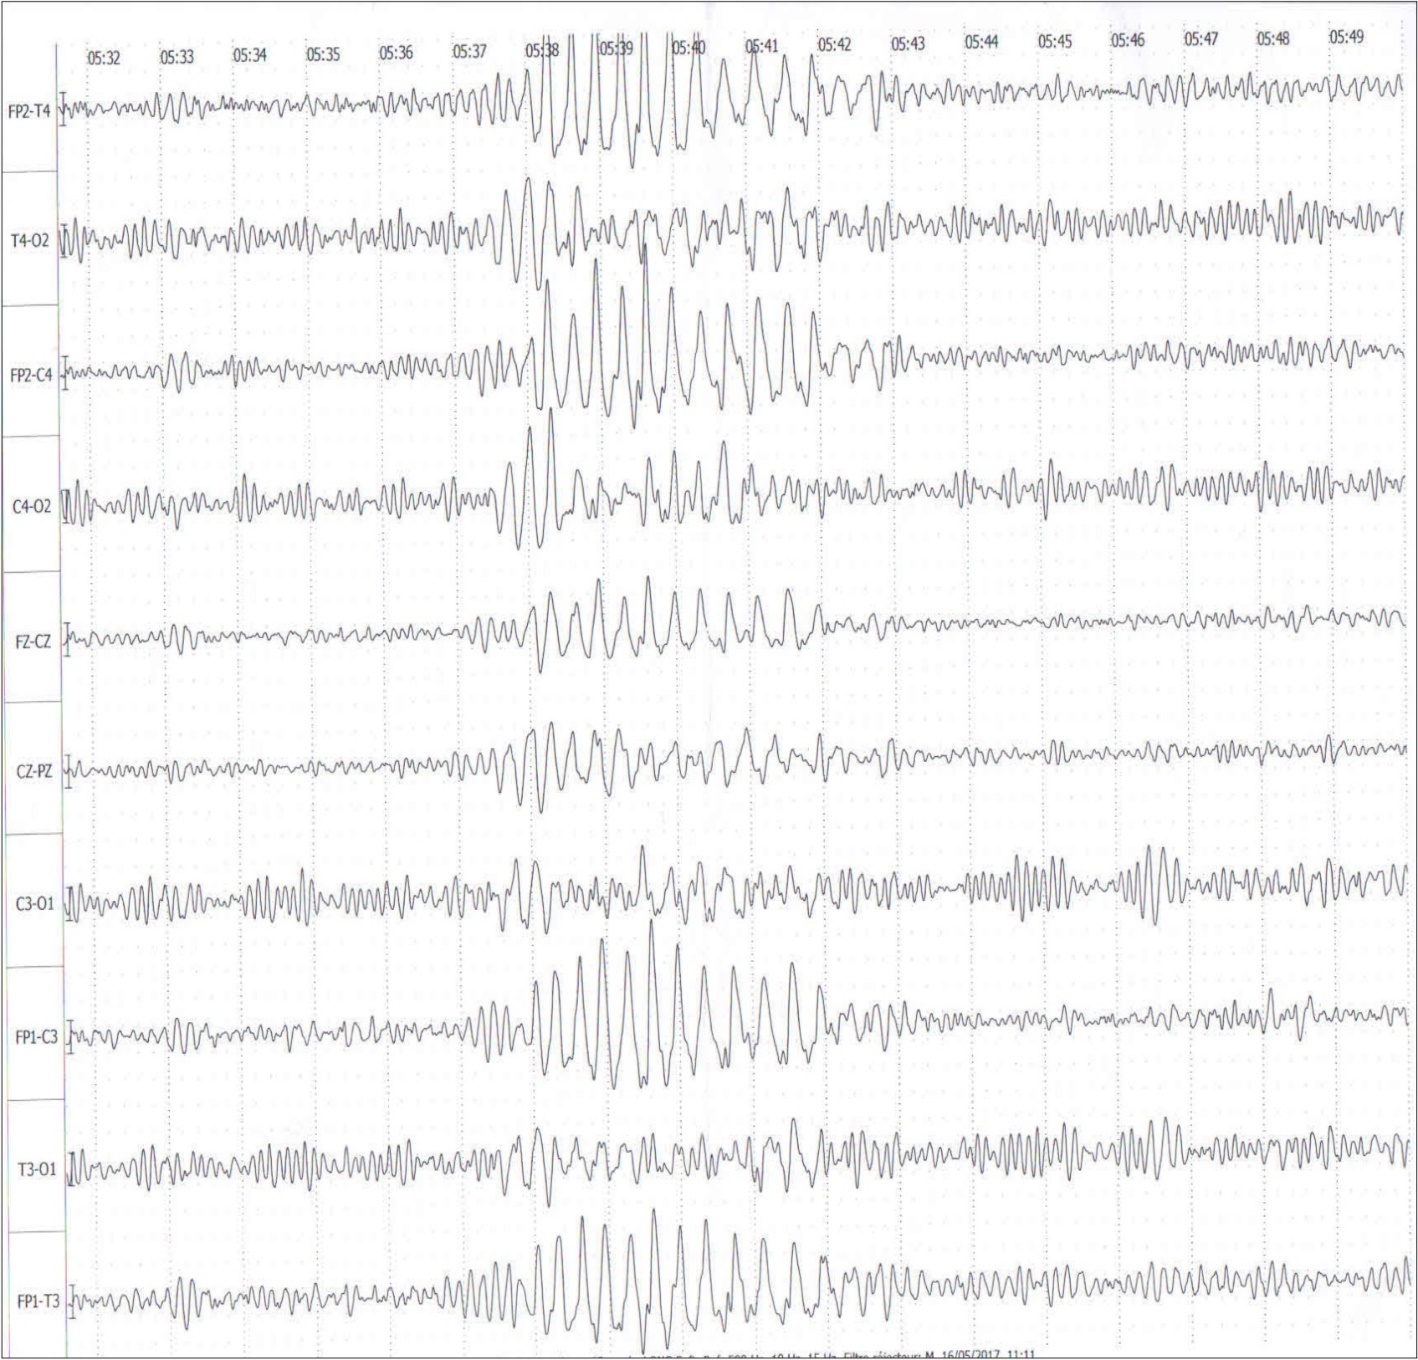  EEG Sleep records showed brief discharges of generalized slow waves and spikes